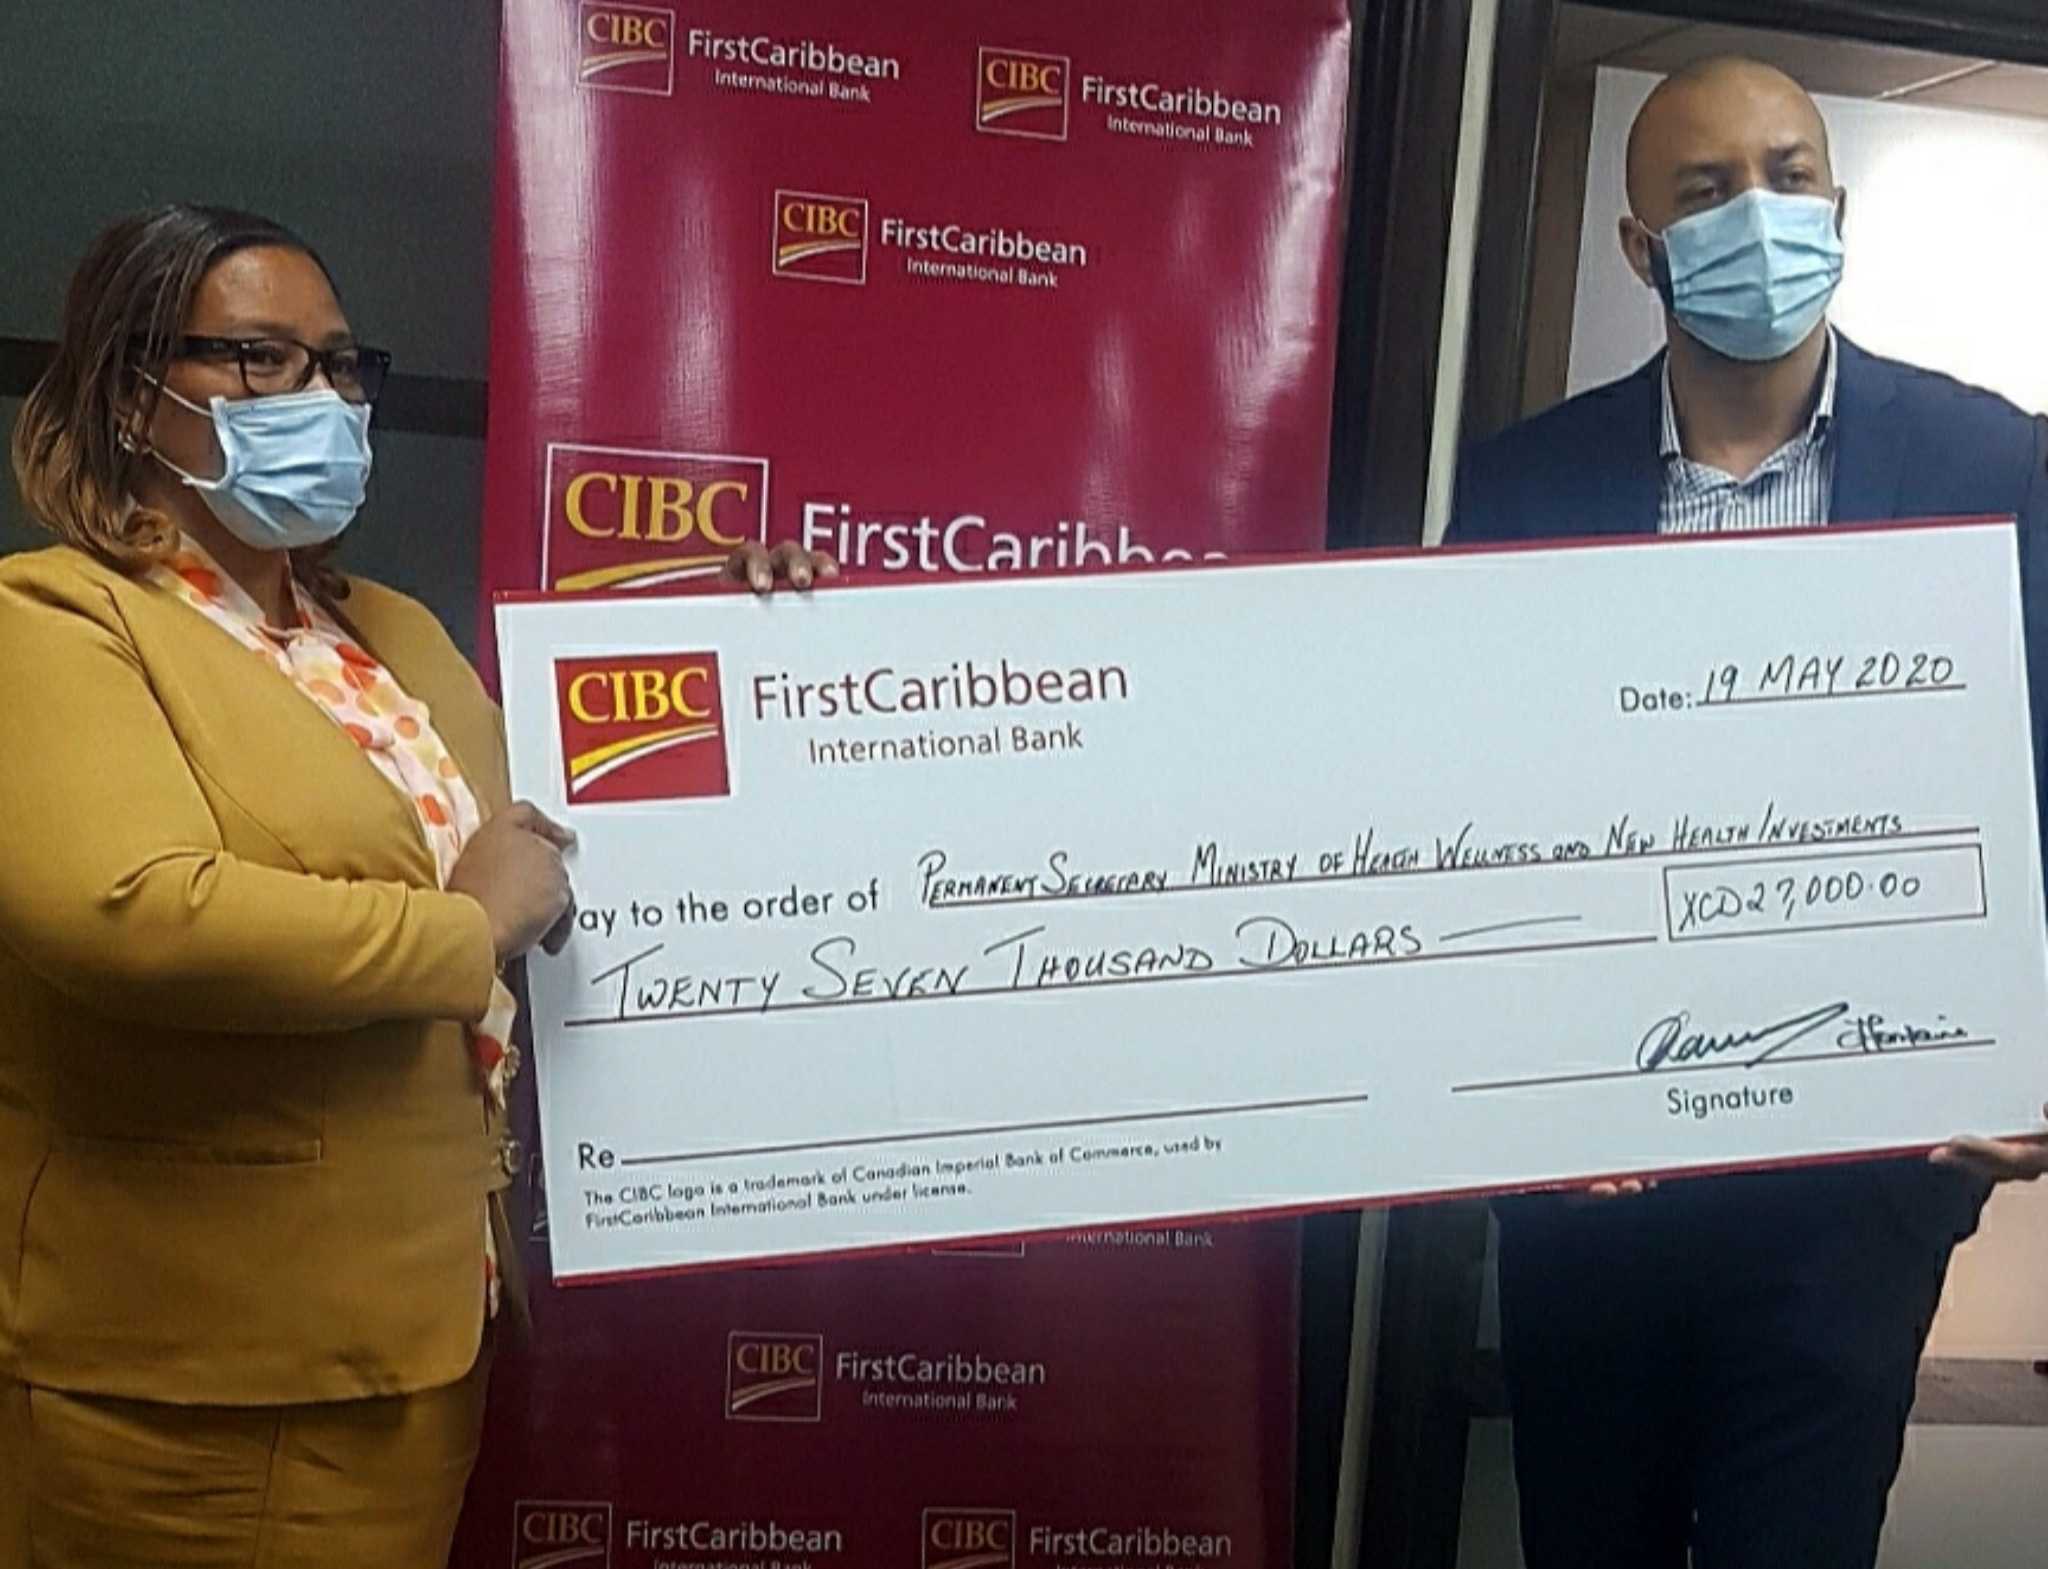 CIBC First Caribbean assist the Ministry of Health against Covid-19 fight